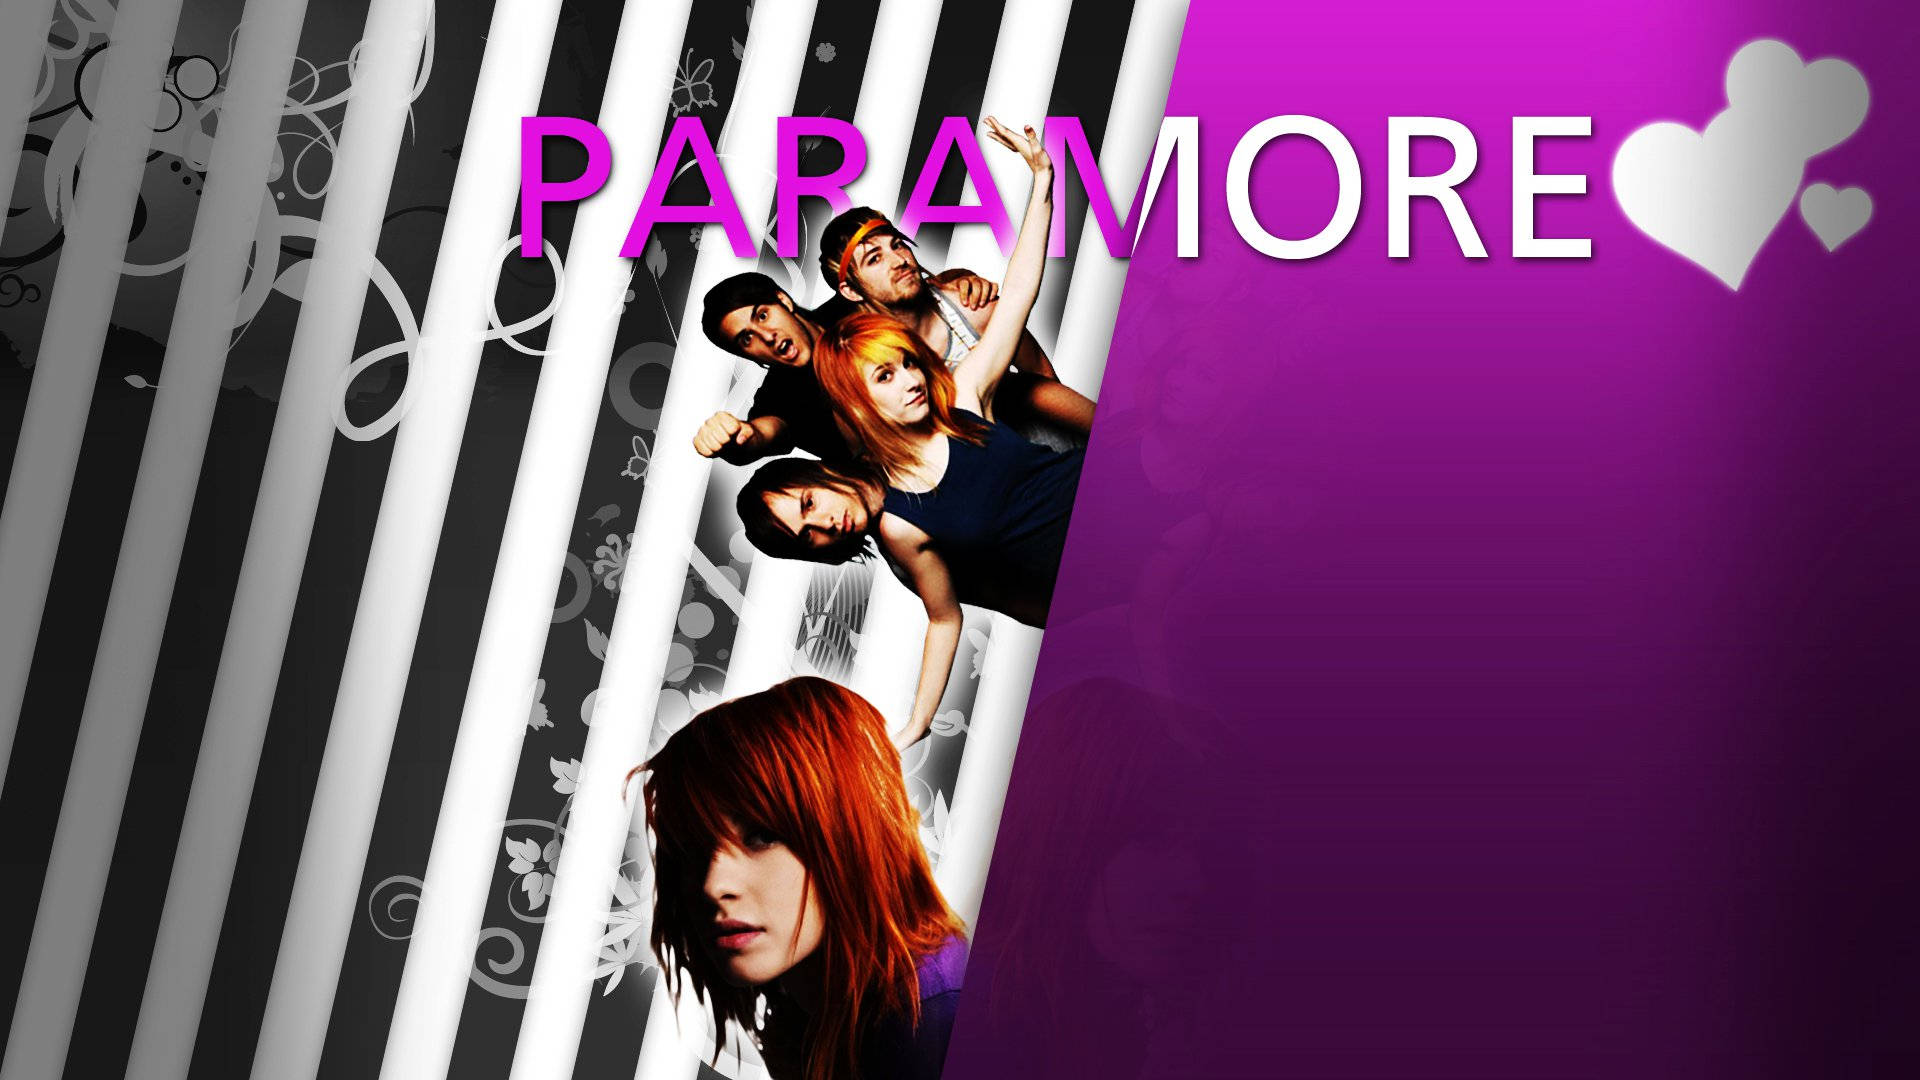 Paramore Band Graphic Fanart Poster Background